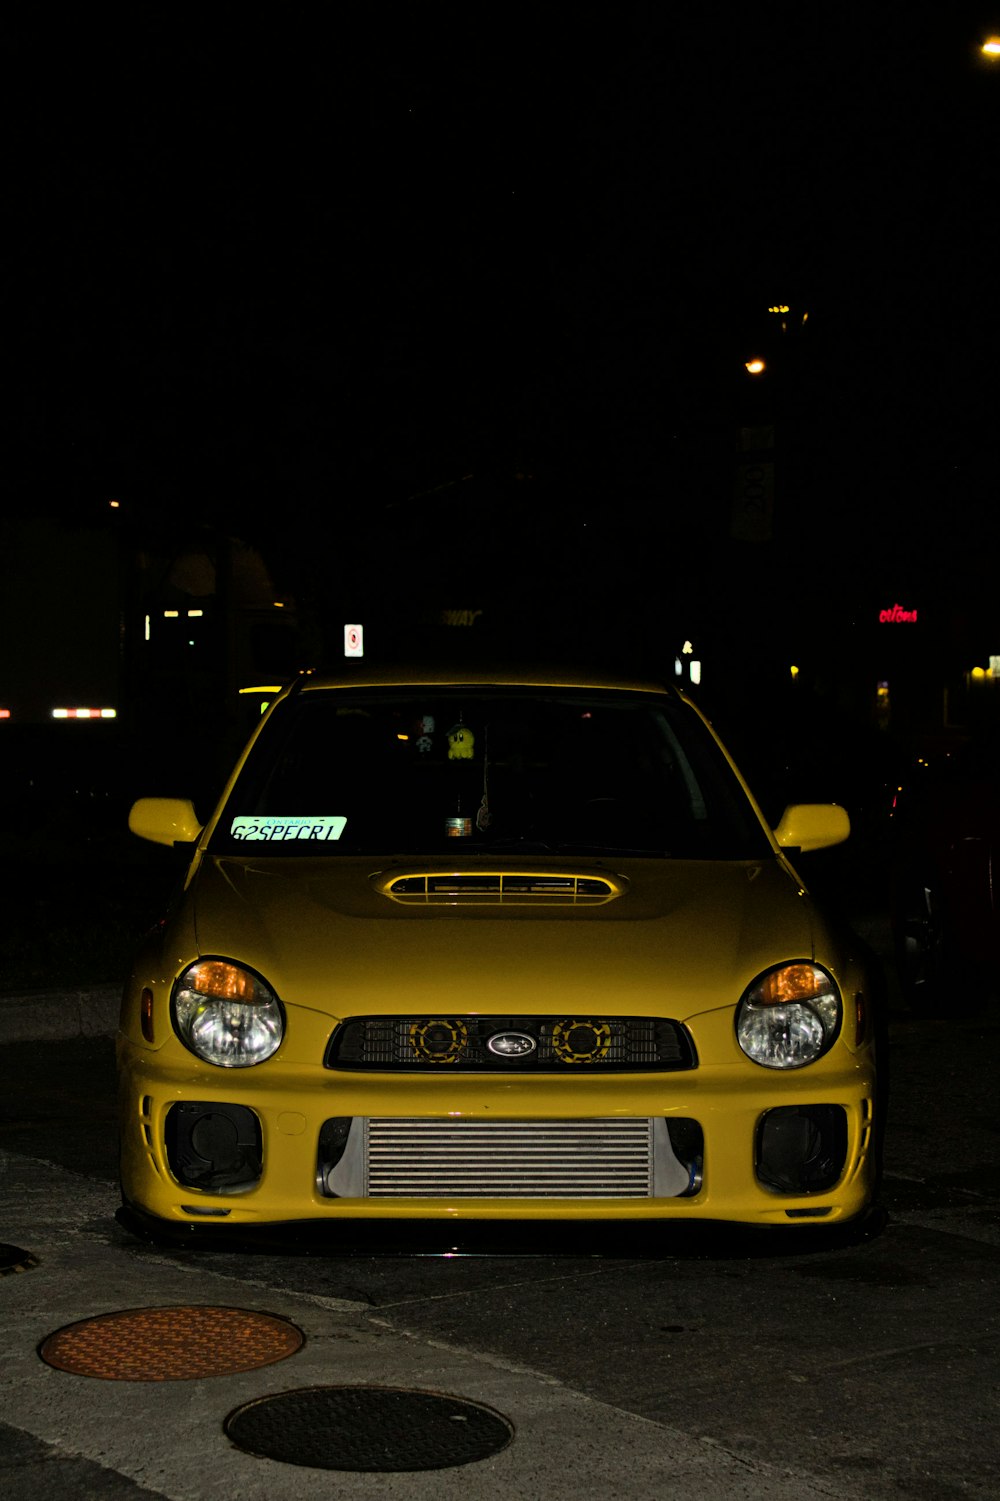 a yellow car parked in a parking lot at night